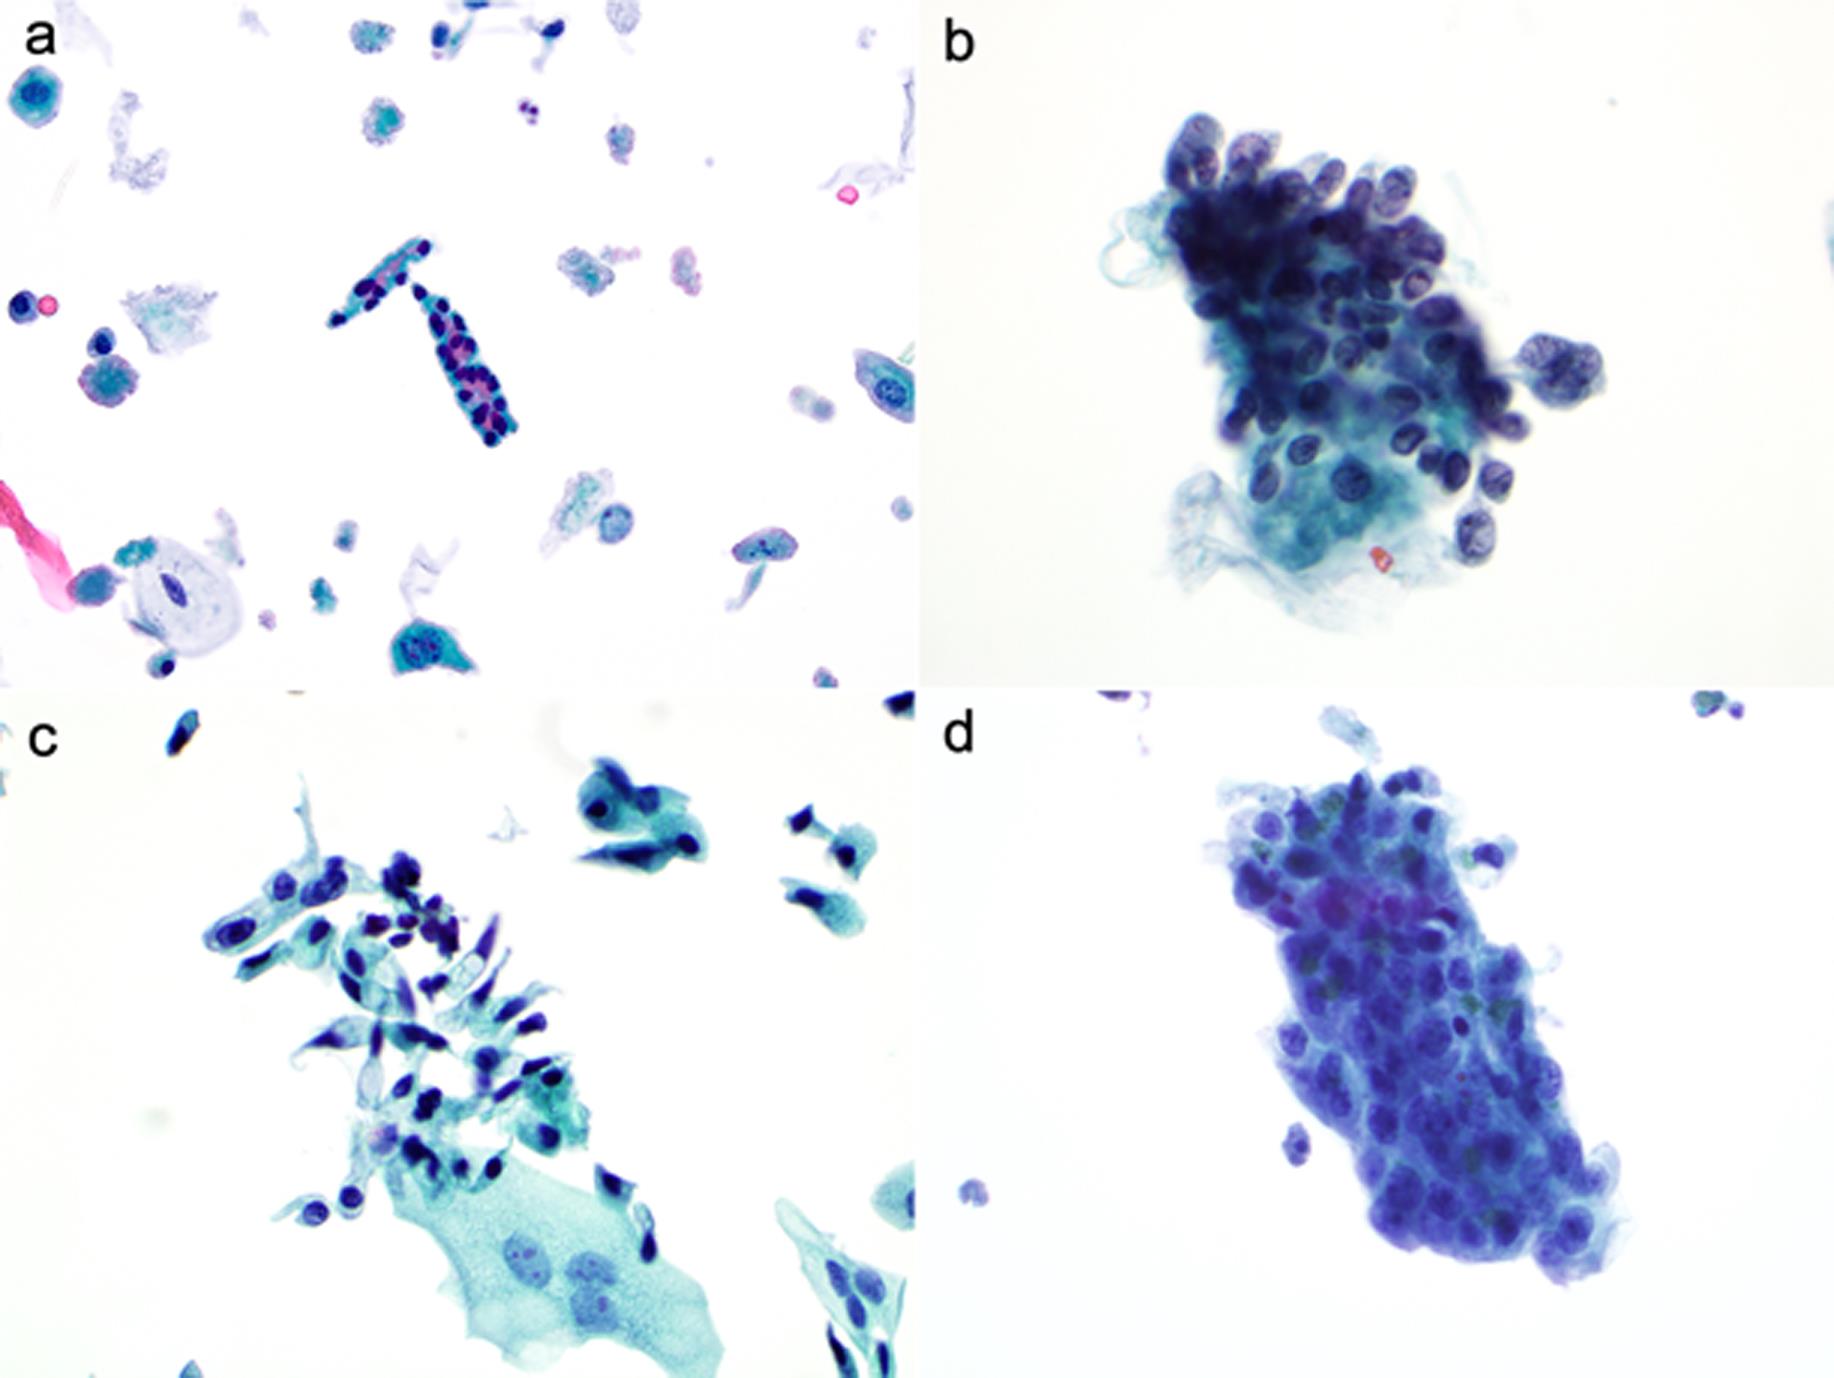 NHGUC: benign glandular cells. Renal tubule cells, present in renal tubule casts (a). Endometriosis, columnar glandular cells with wispy and vacuolated cytoplasm, and small round or oval nuclei (b) Cystitis glandularis, columnar cells with moderate vacuolated cytoplasm, and small round nuclei (c). Prostatic cells, columnar glandular cells arranged in glandular formation, with cytoplasmic pigments (d).